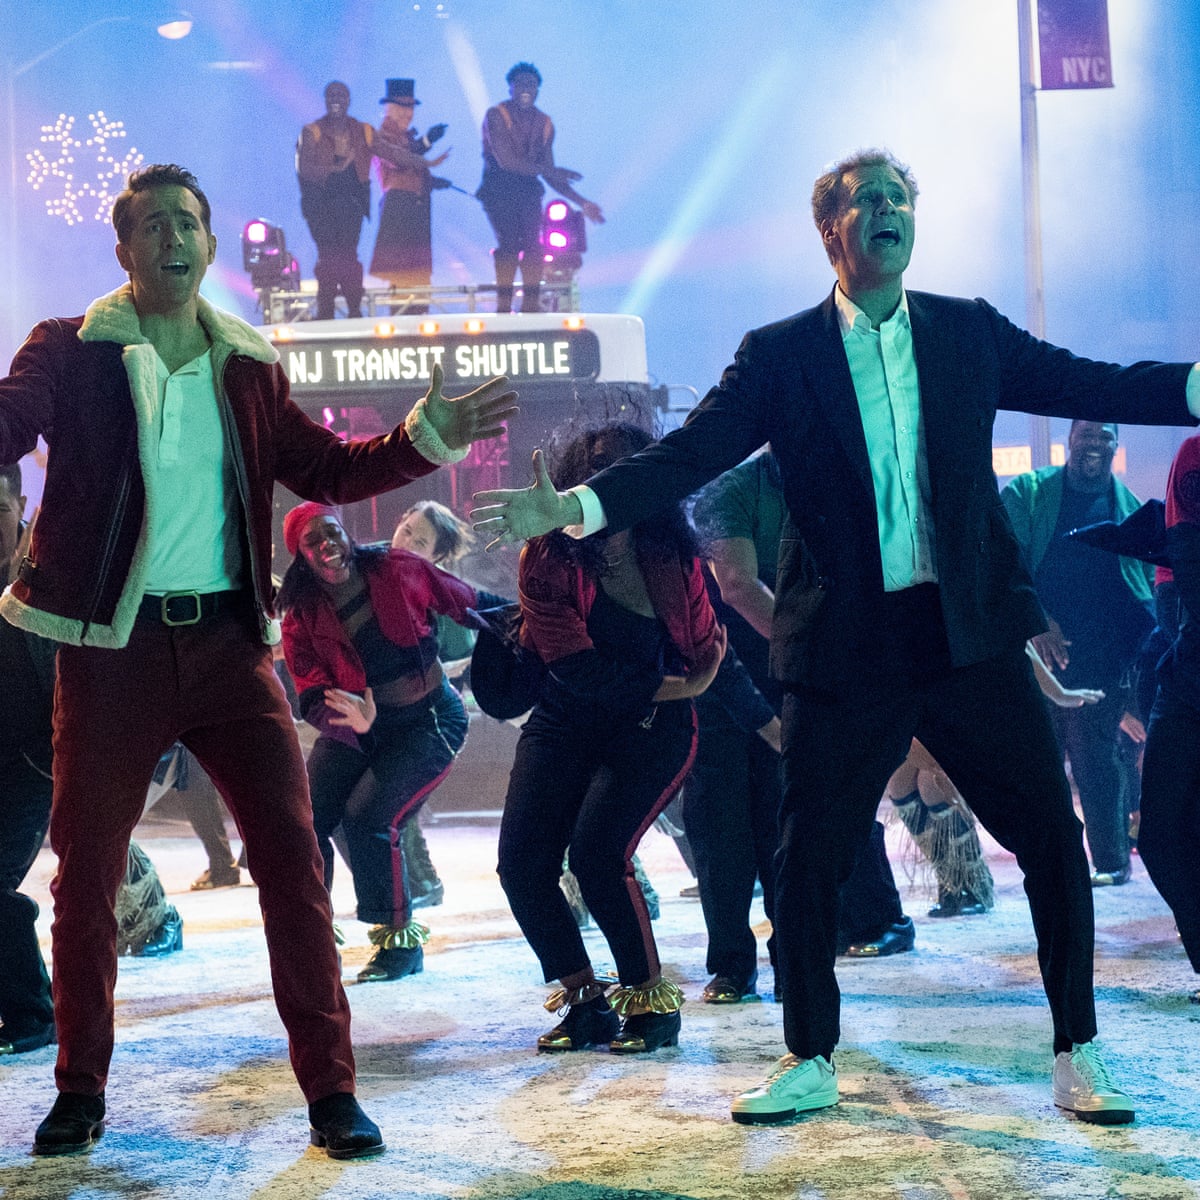 Spirited review – Will Ferrell and Ryan Reynolds hit all the wrong notes in Christmas musical | Will Ferrell | The Guardian